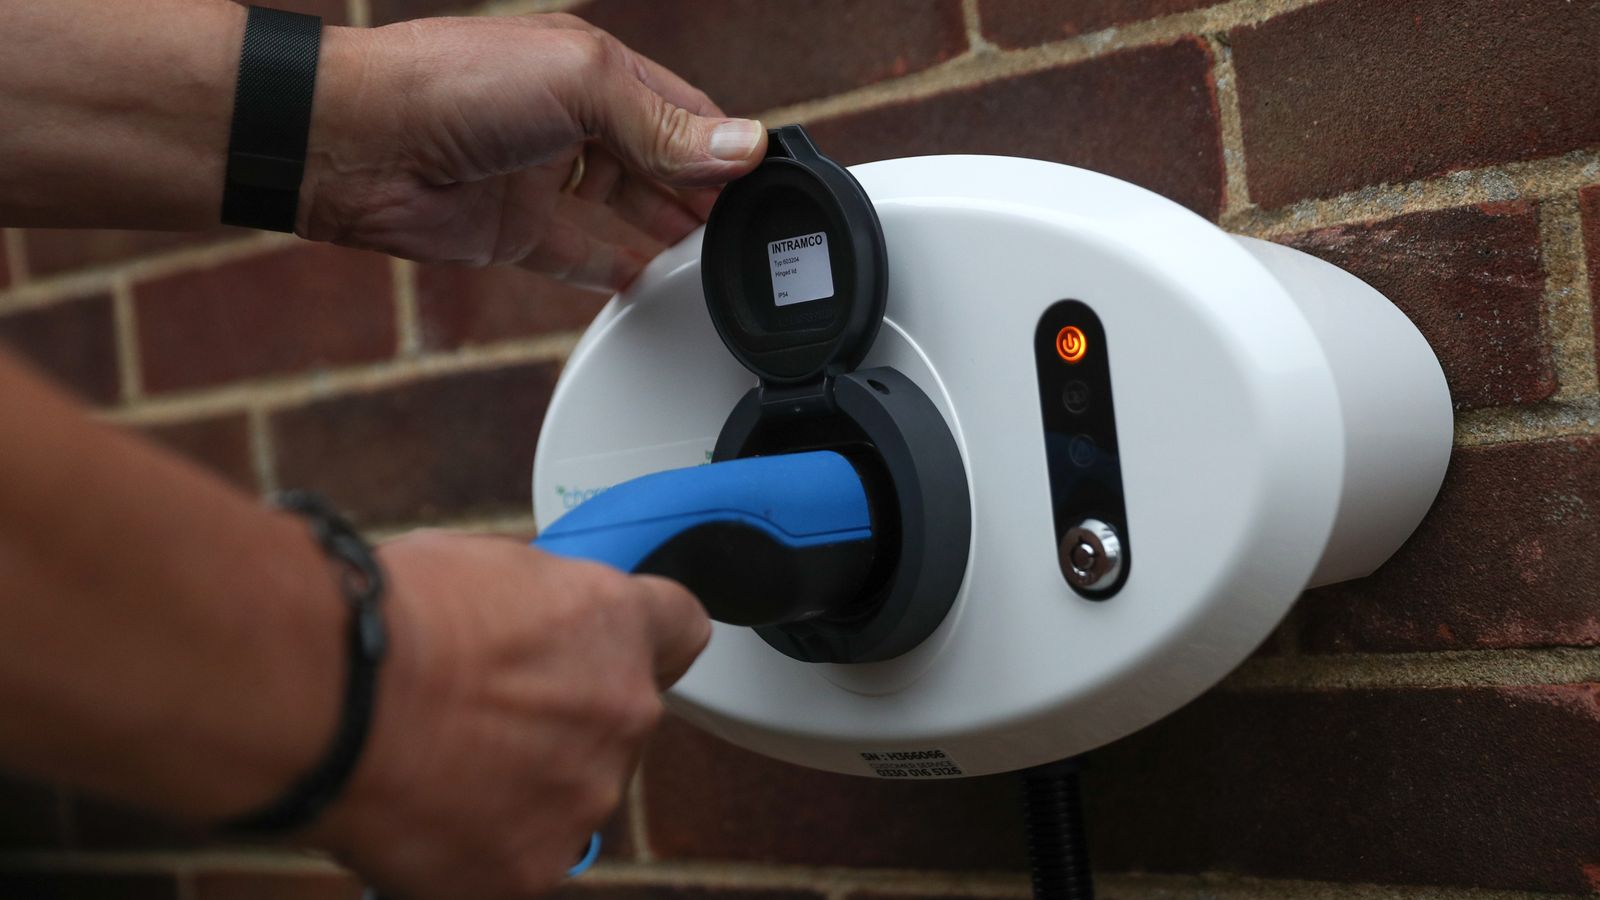 Electric vehicles: New homes will be required to have EV charging stations from 2022, Boris Johnson to announce